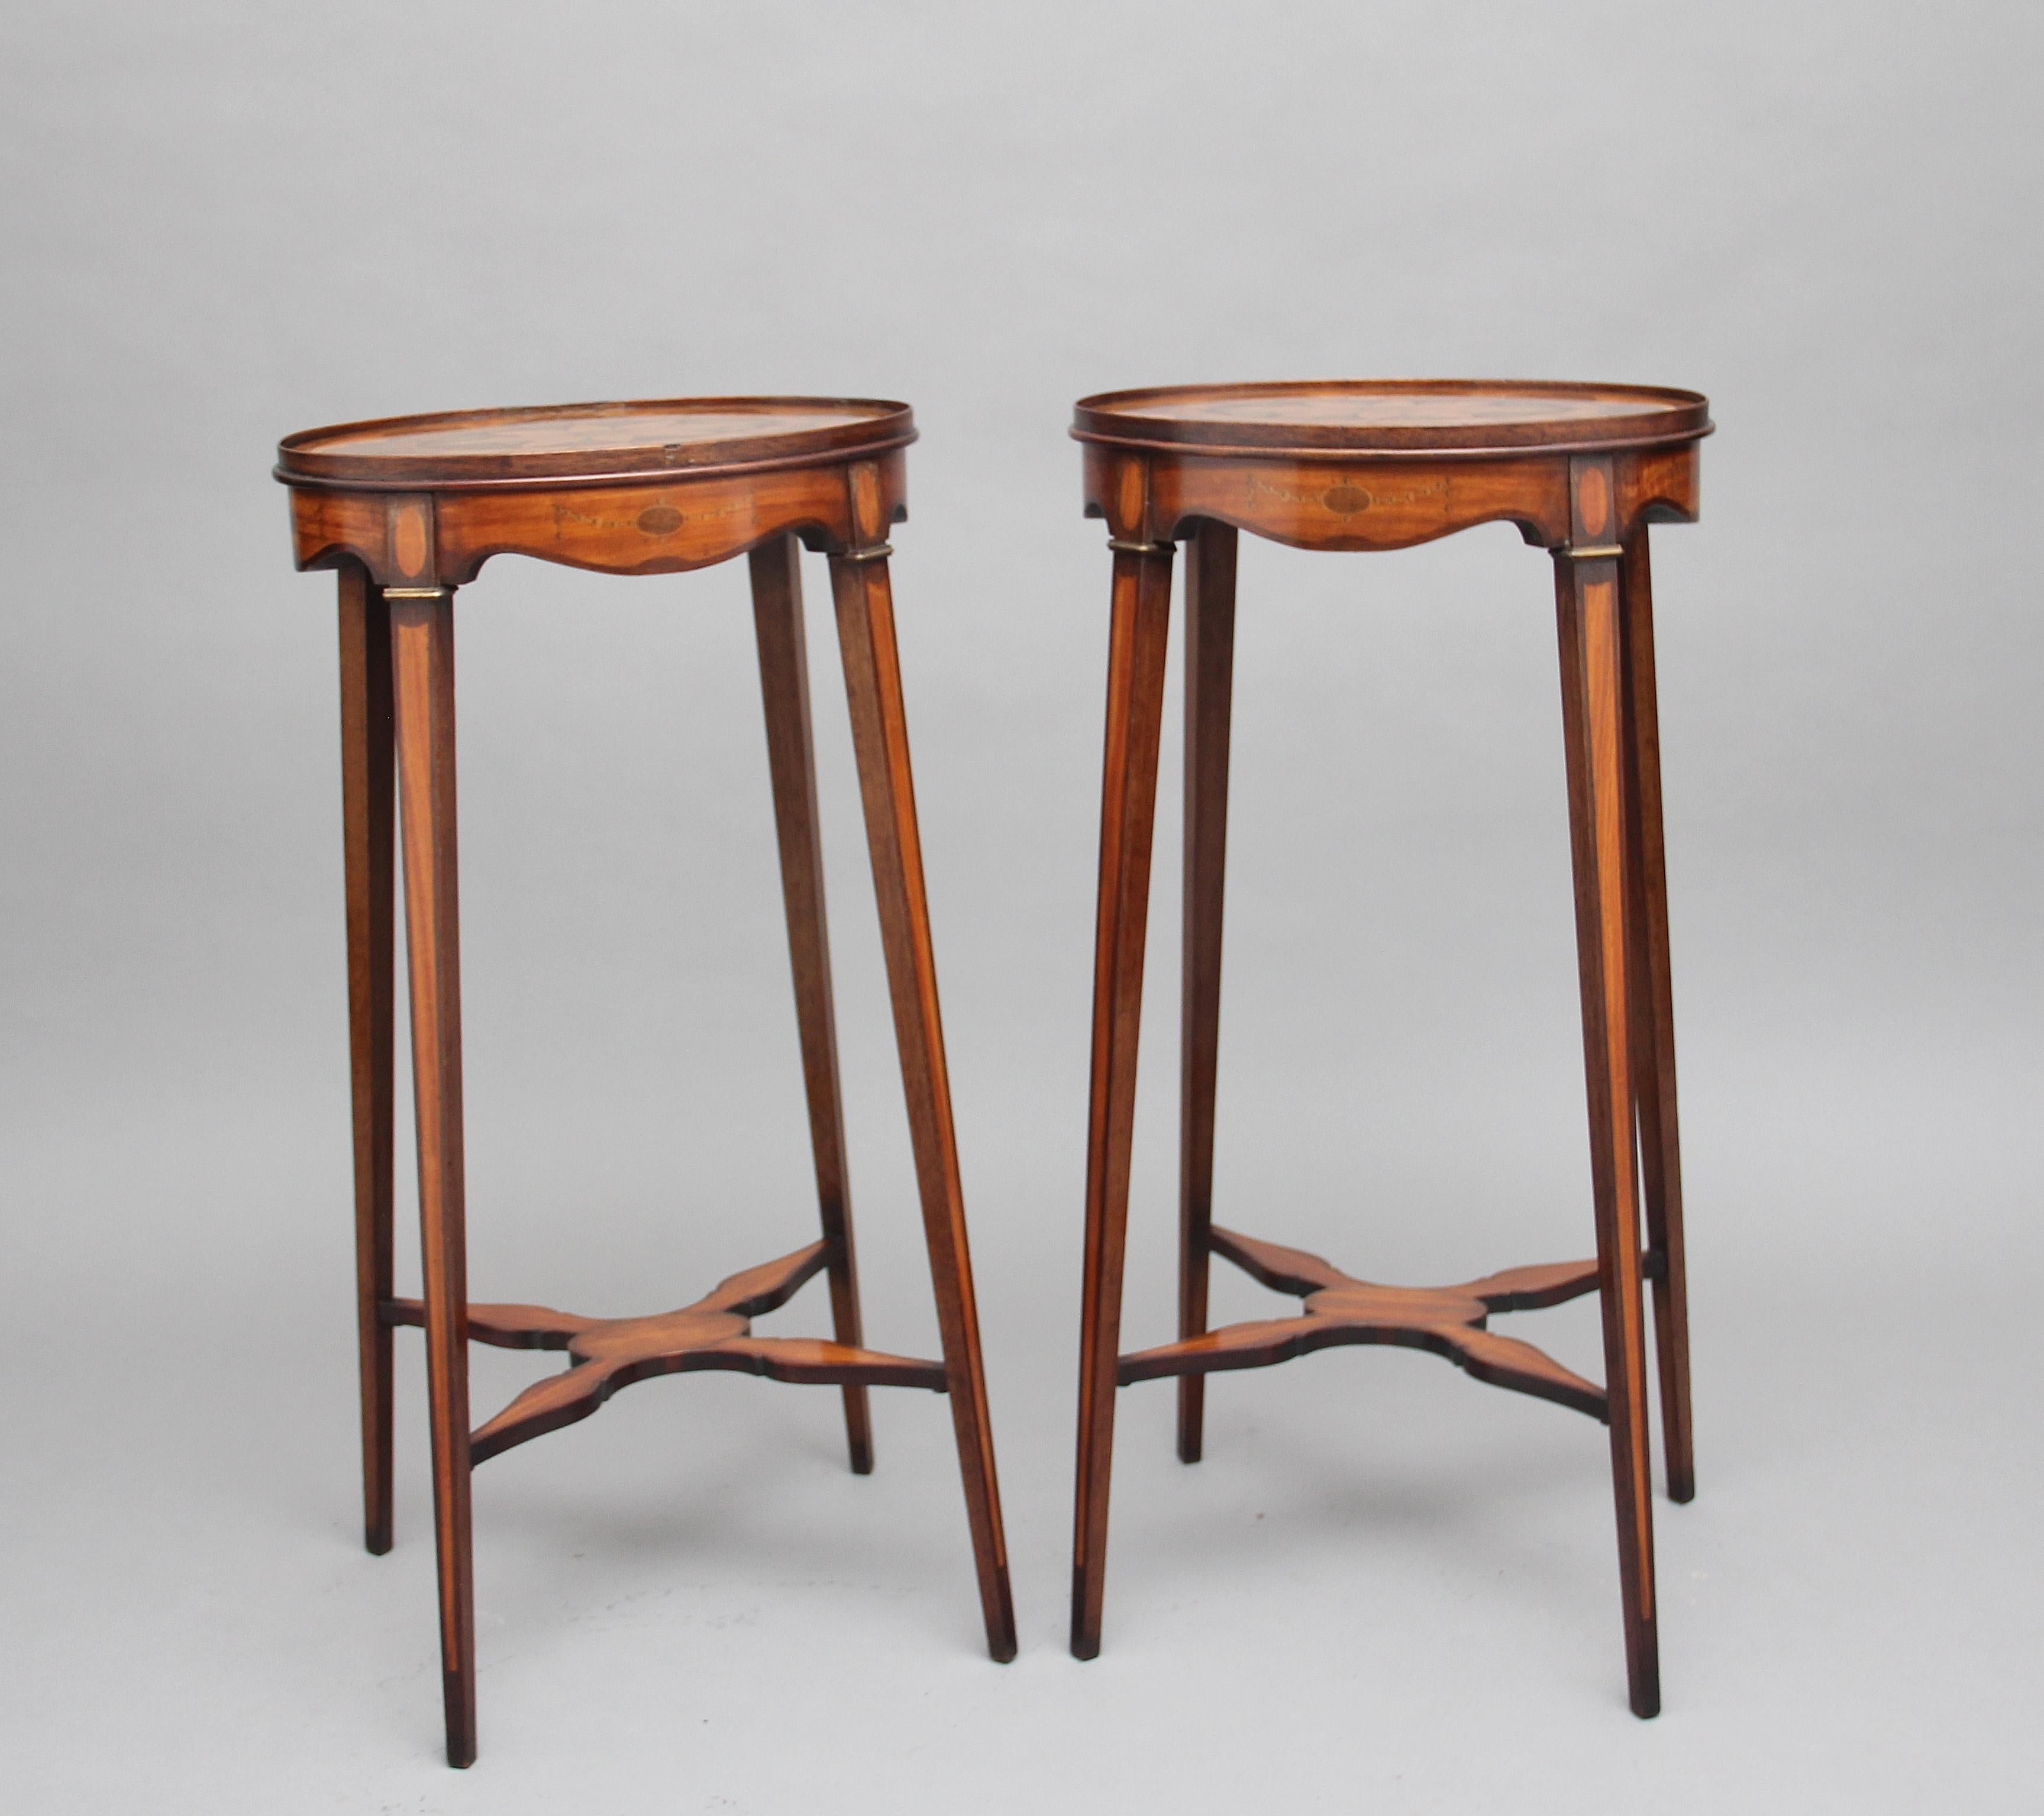 Pair of Sheraton Revival Mahogany and Inlaid Urn Stands For Sale 4